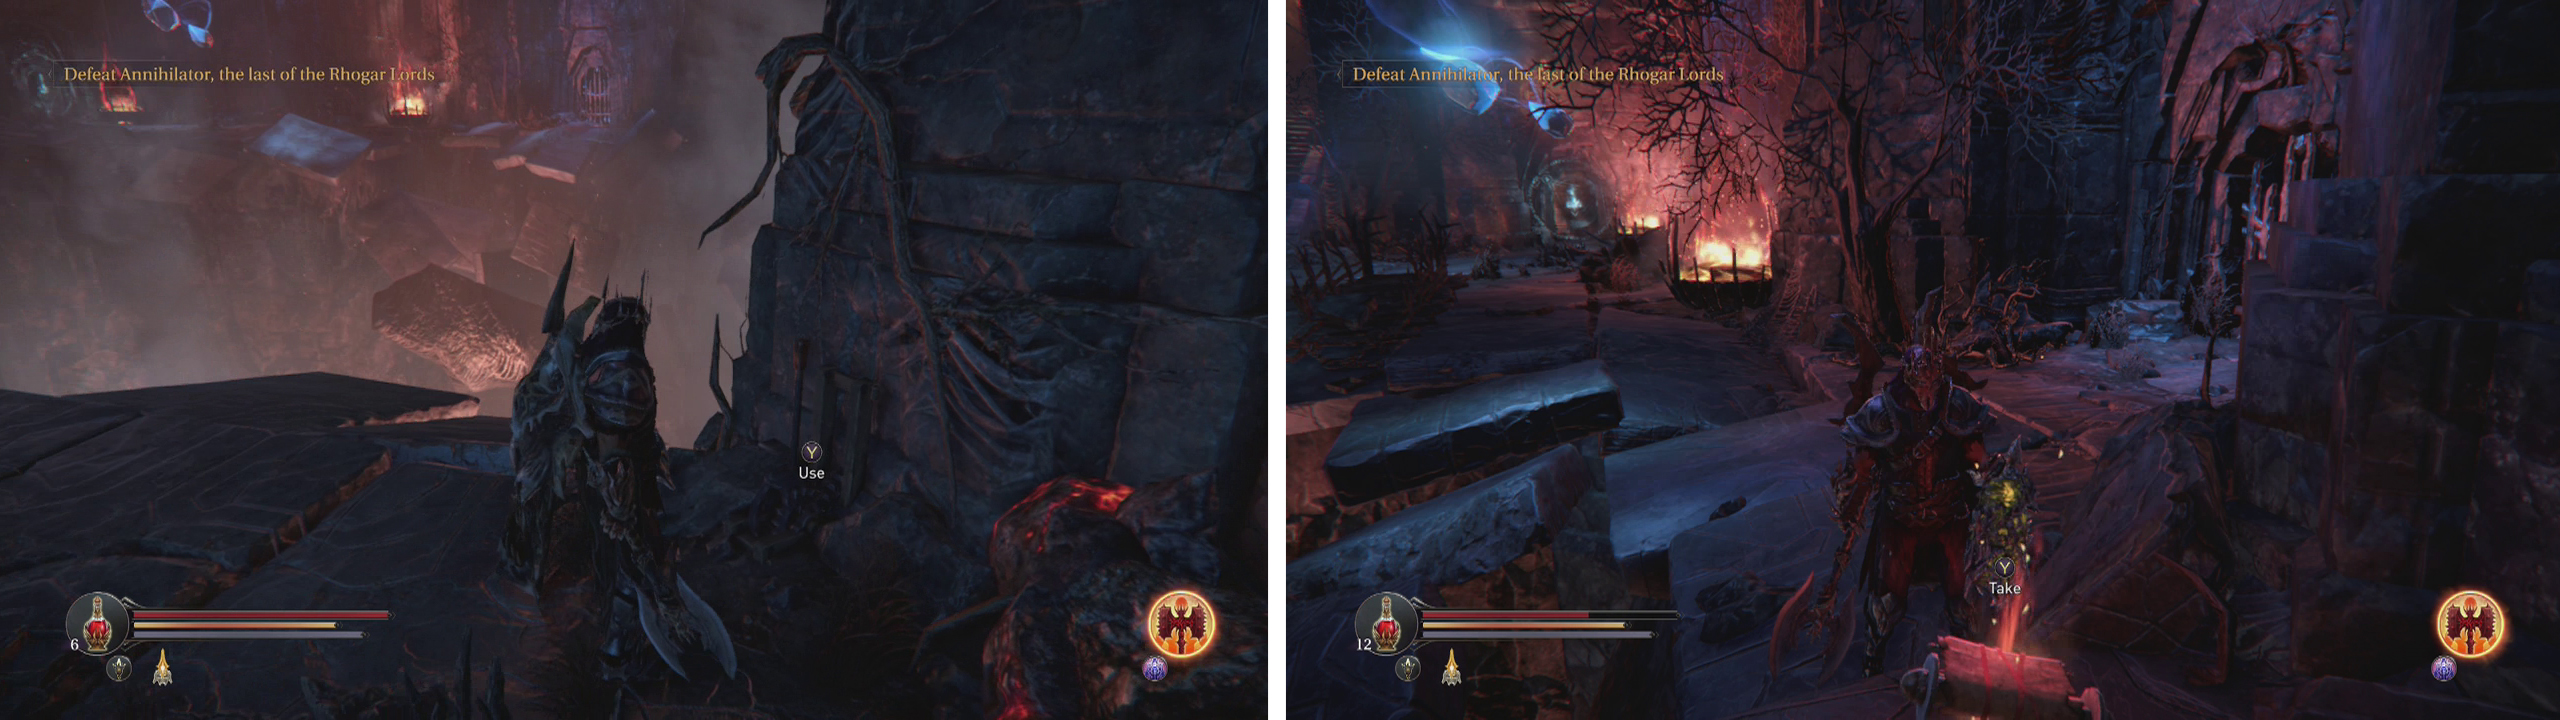 Pull the lever on the South Edge of the abyss room (left) to open the locked gate on the North side of the room (right). Inside is the Staffs Head quest item.